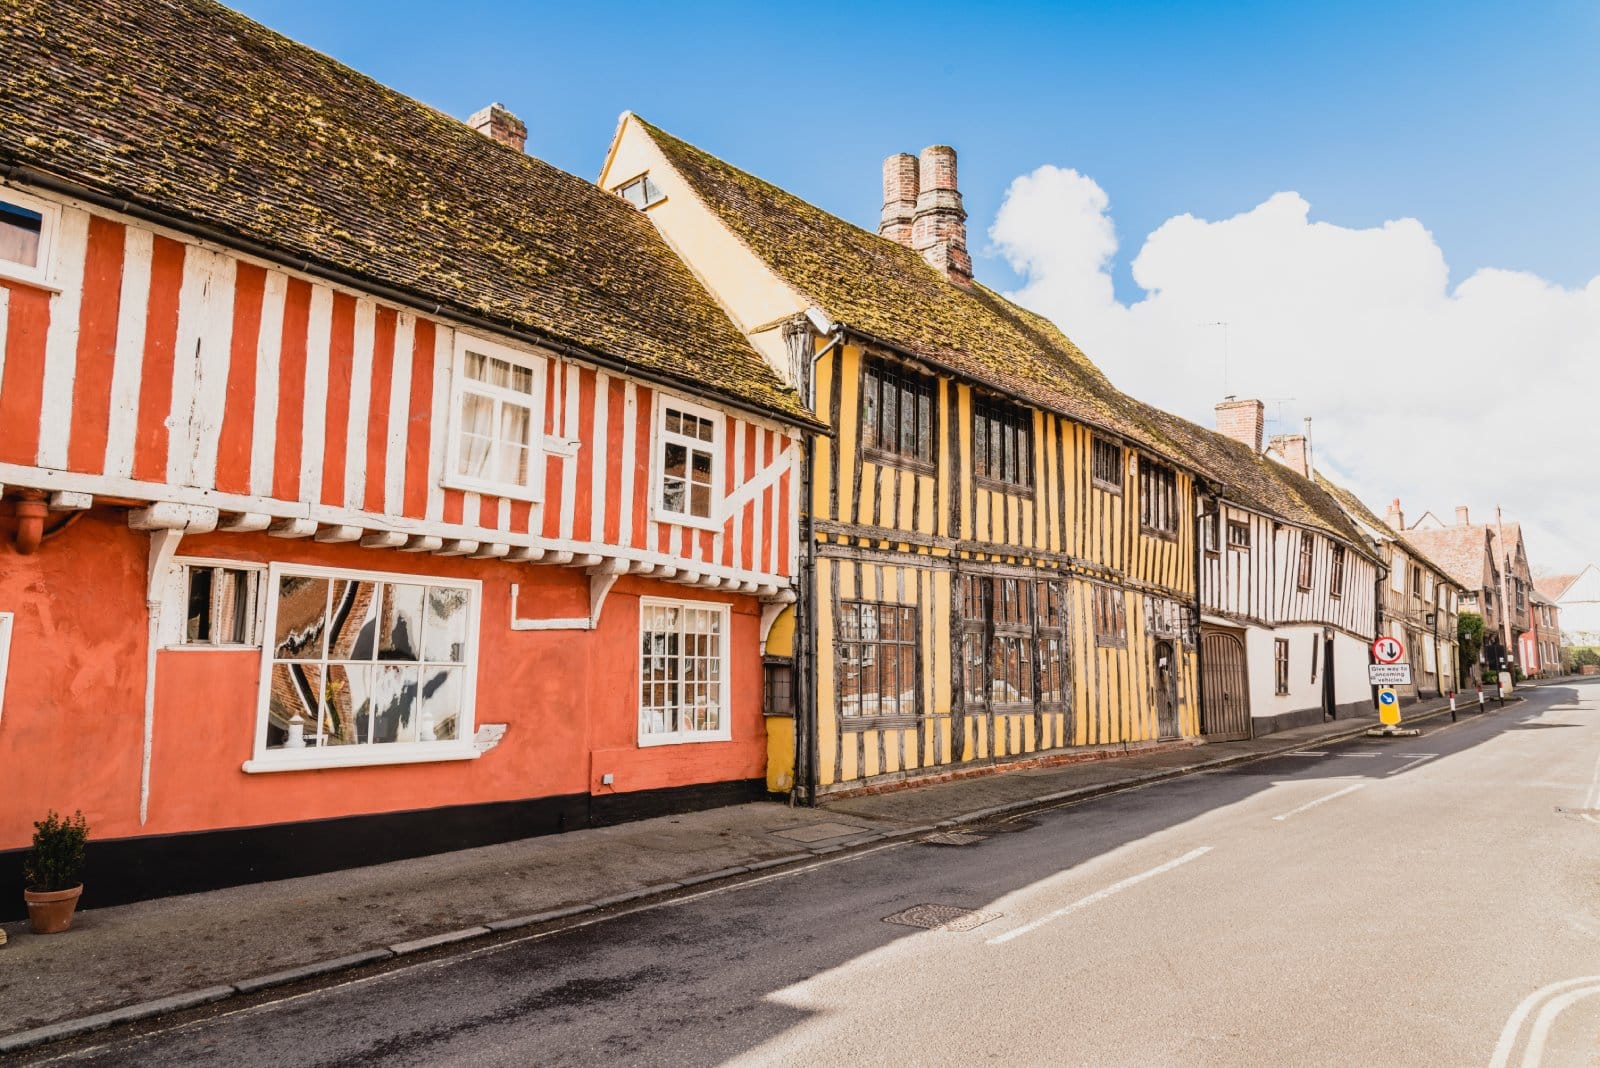 Image Credit: Shutterstock / Andrew Fletcher <p>Lavenham’s Tudor-style architecture gives it a fairy-tale quality that’s hard to find elsewhere. However, navigating its narrow streets can be less than magical during tourist peaks.</p>